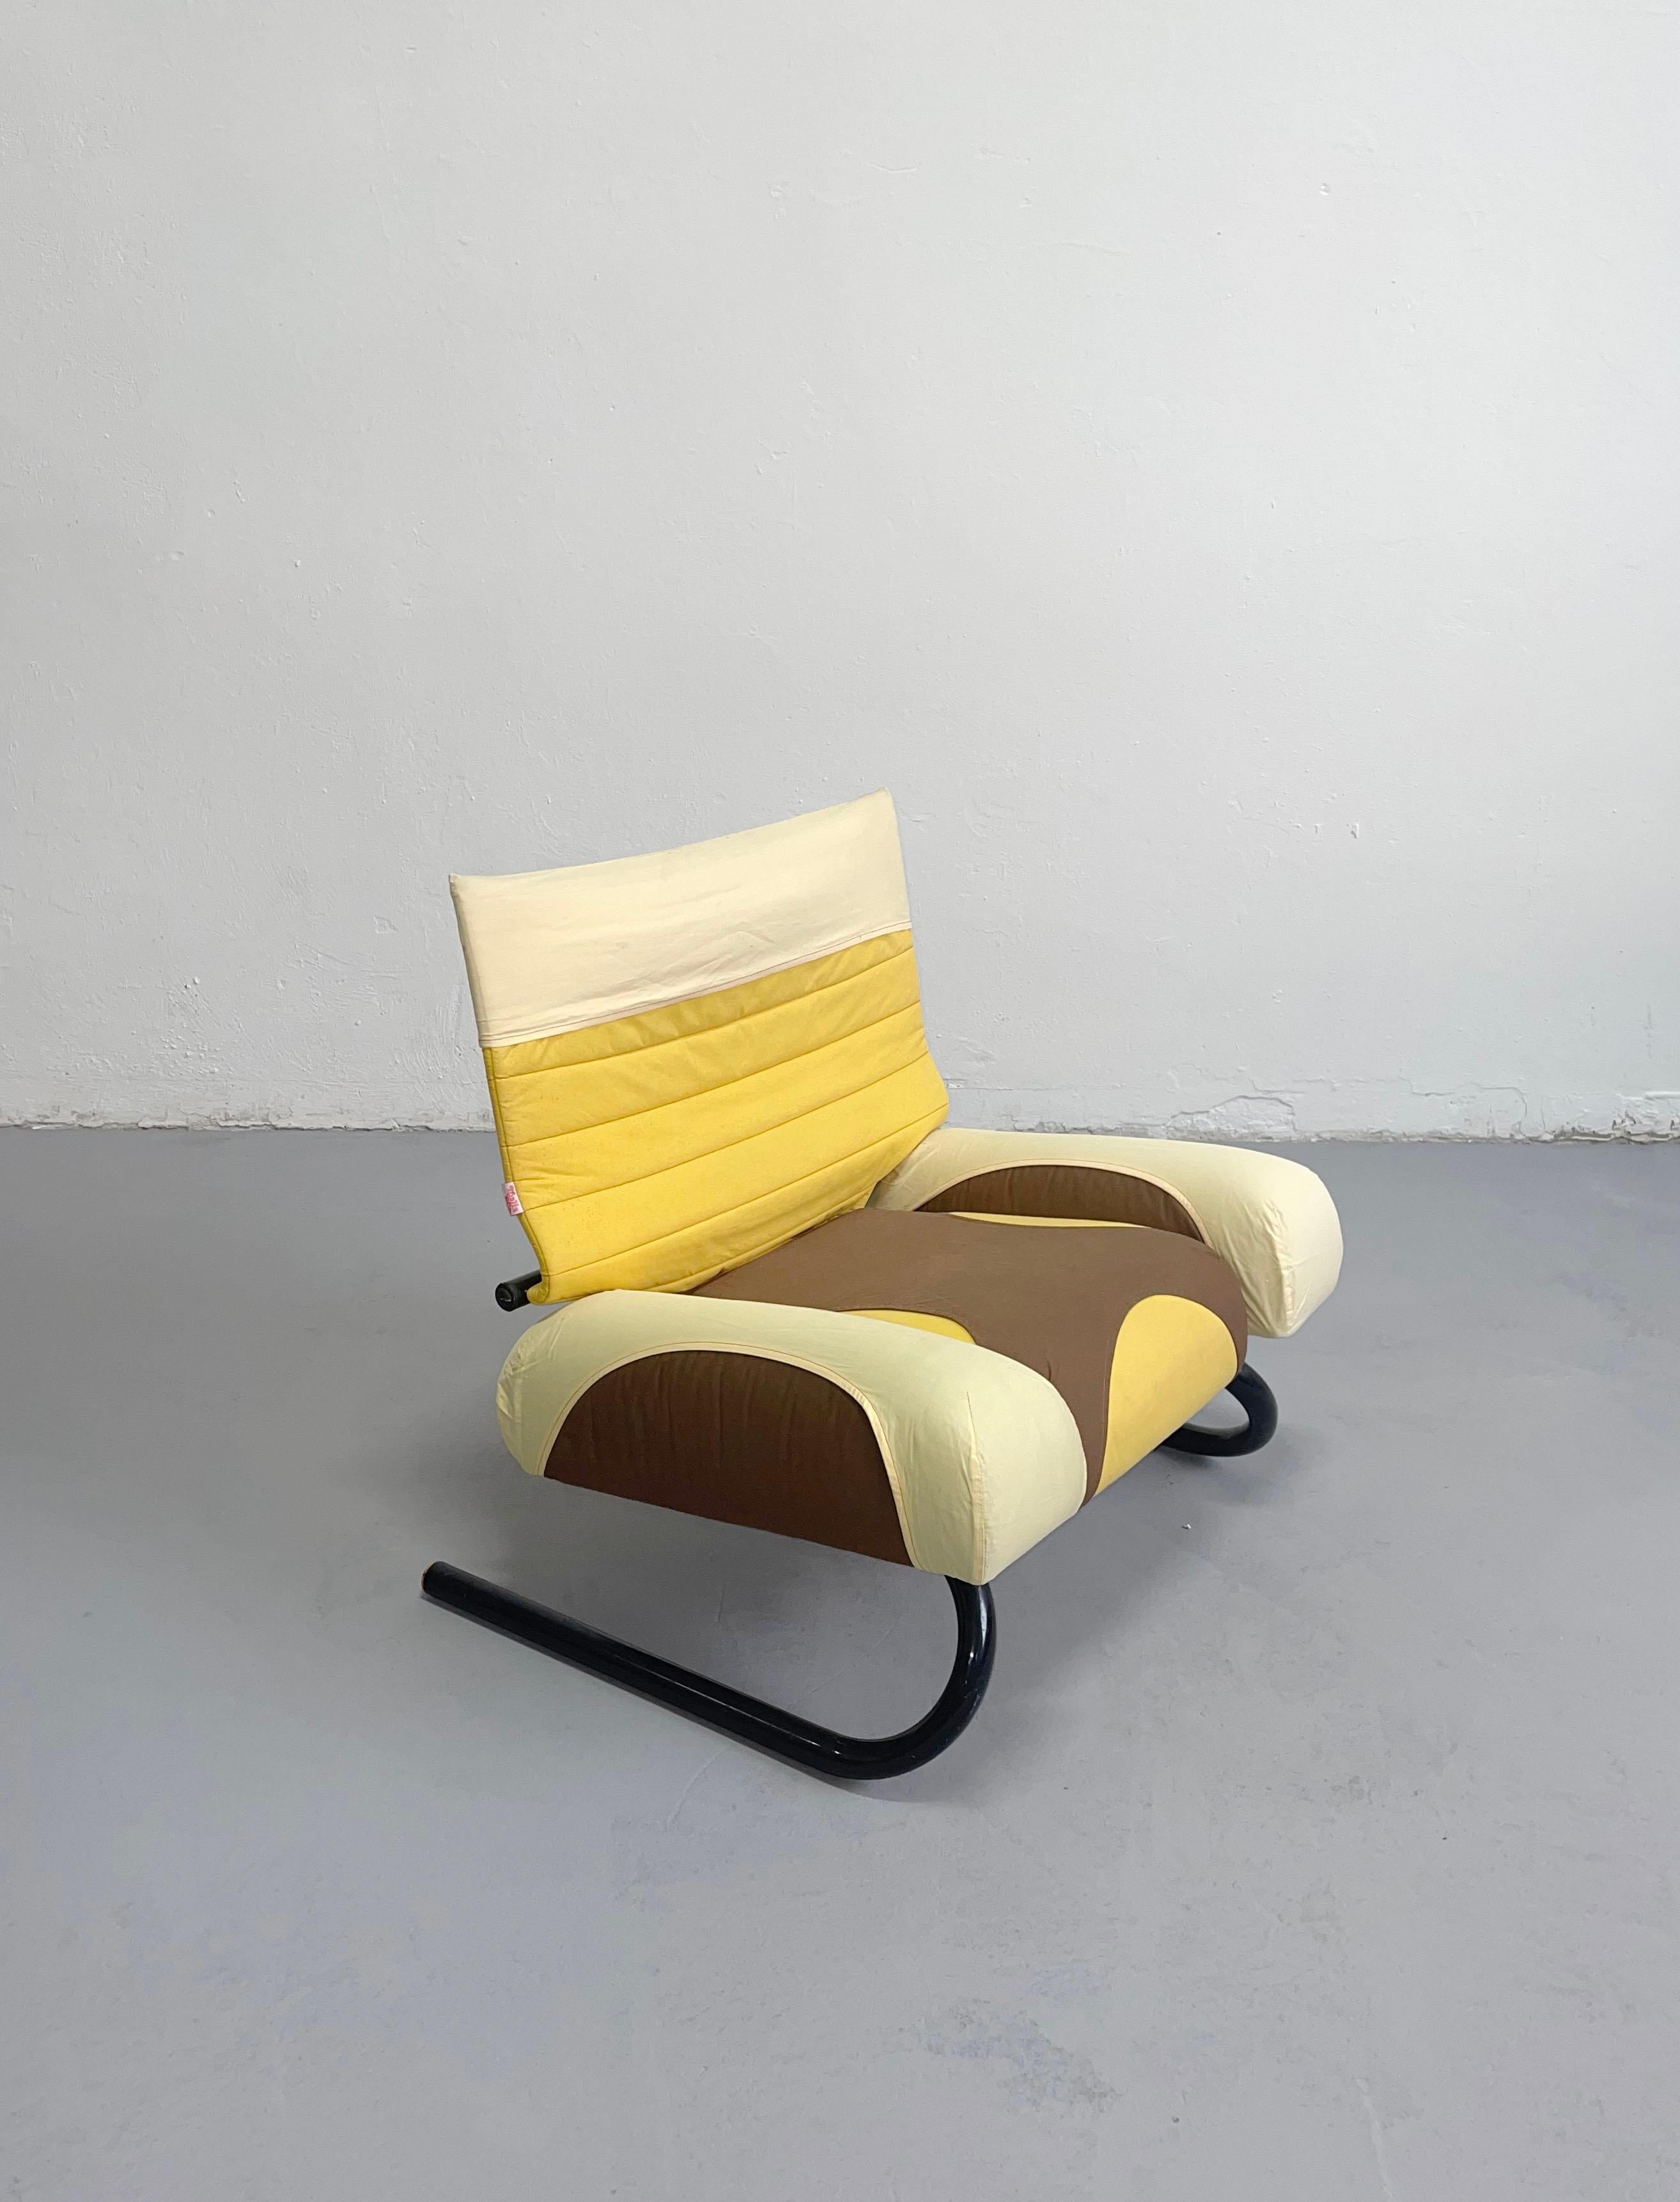 Metal Postmodern 'Peter Pan' Lounge Chair, Michele De Lucchi for Thalia&Co, Italy 1982 For Sale